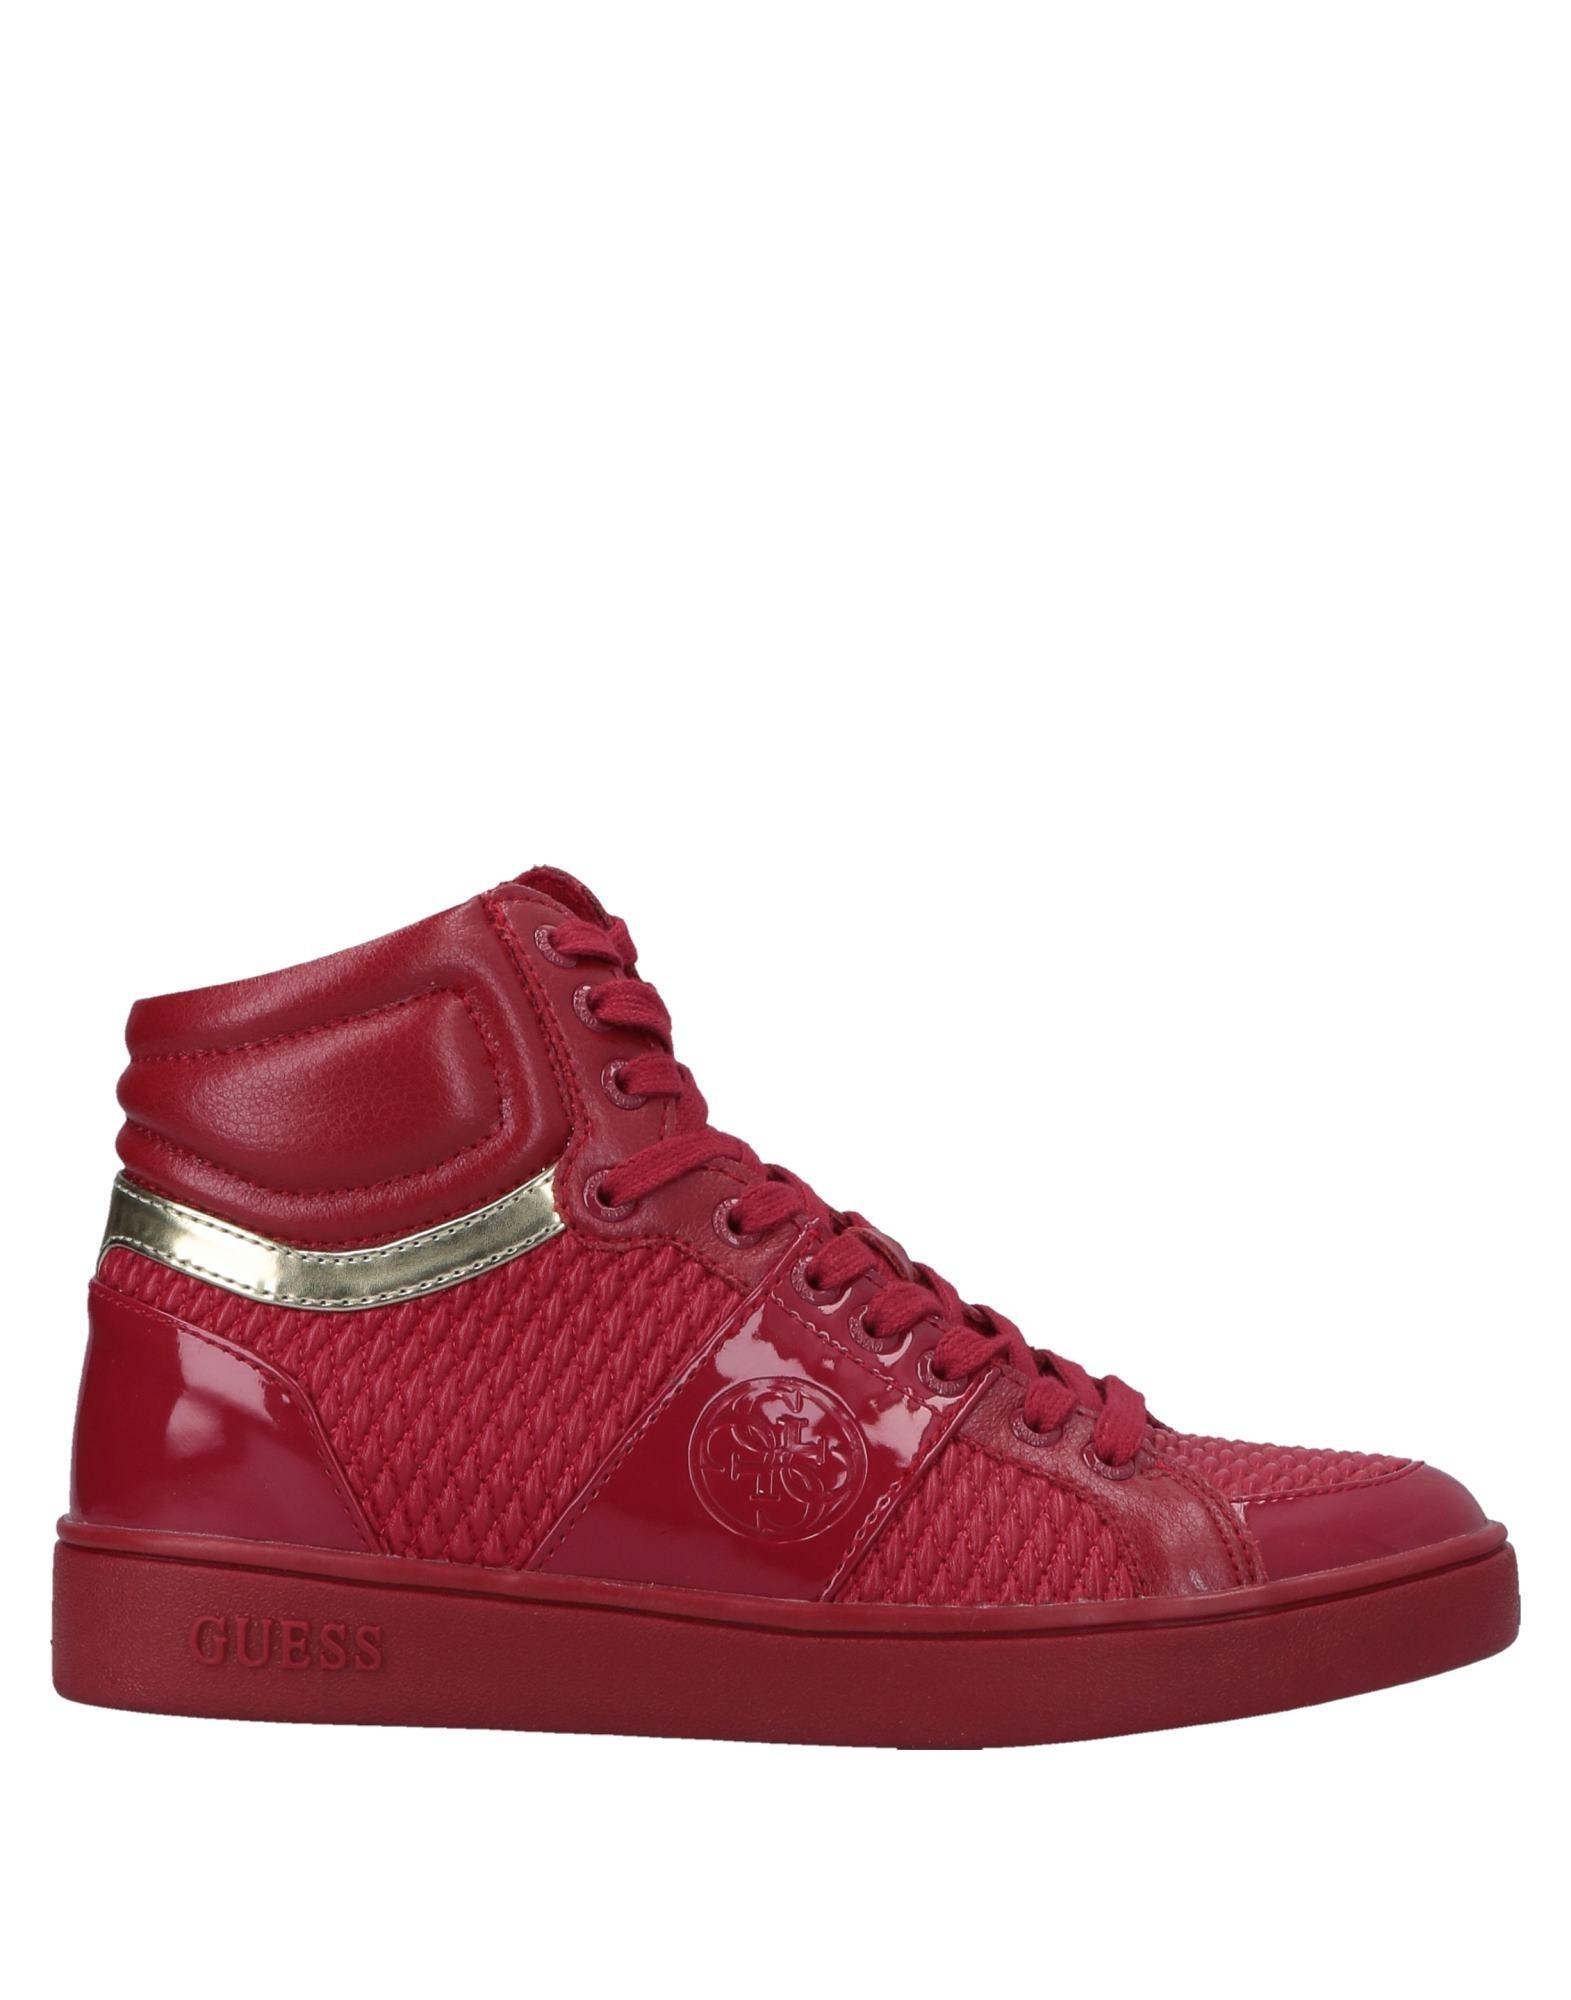 Guess High-tops \u0026 Sneakers in Red - Lyst